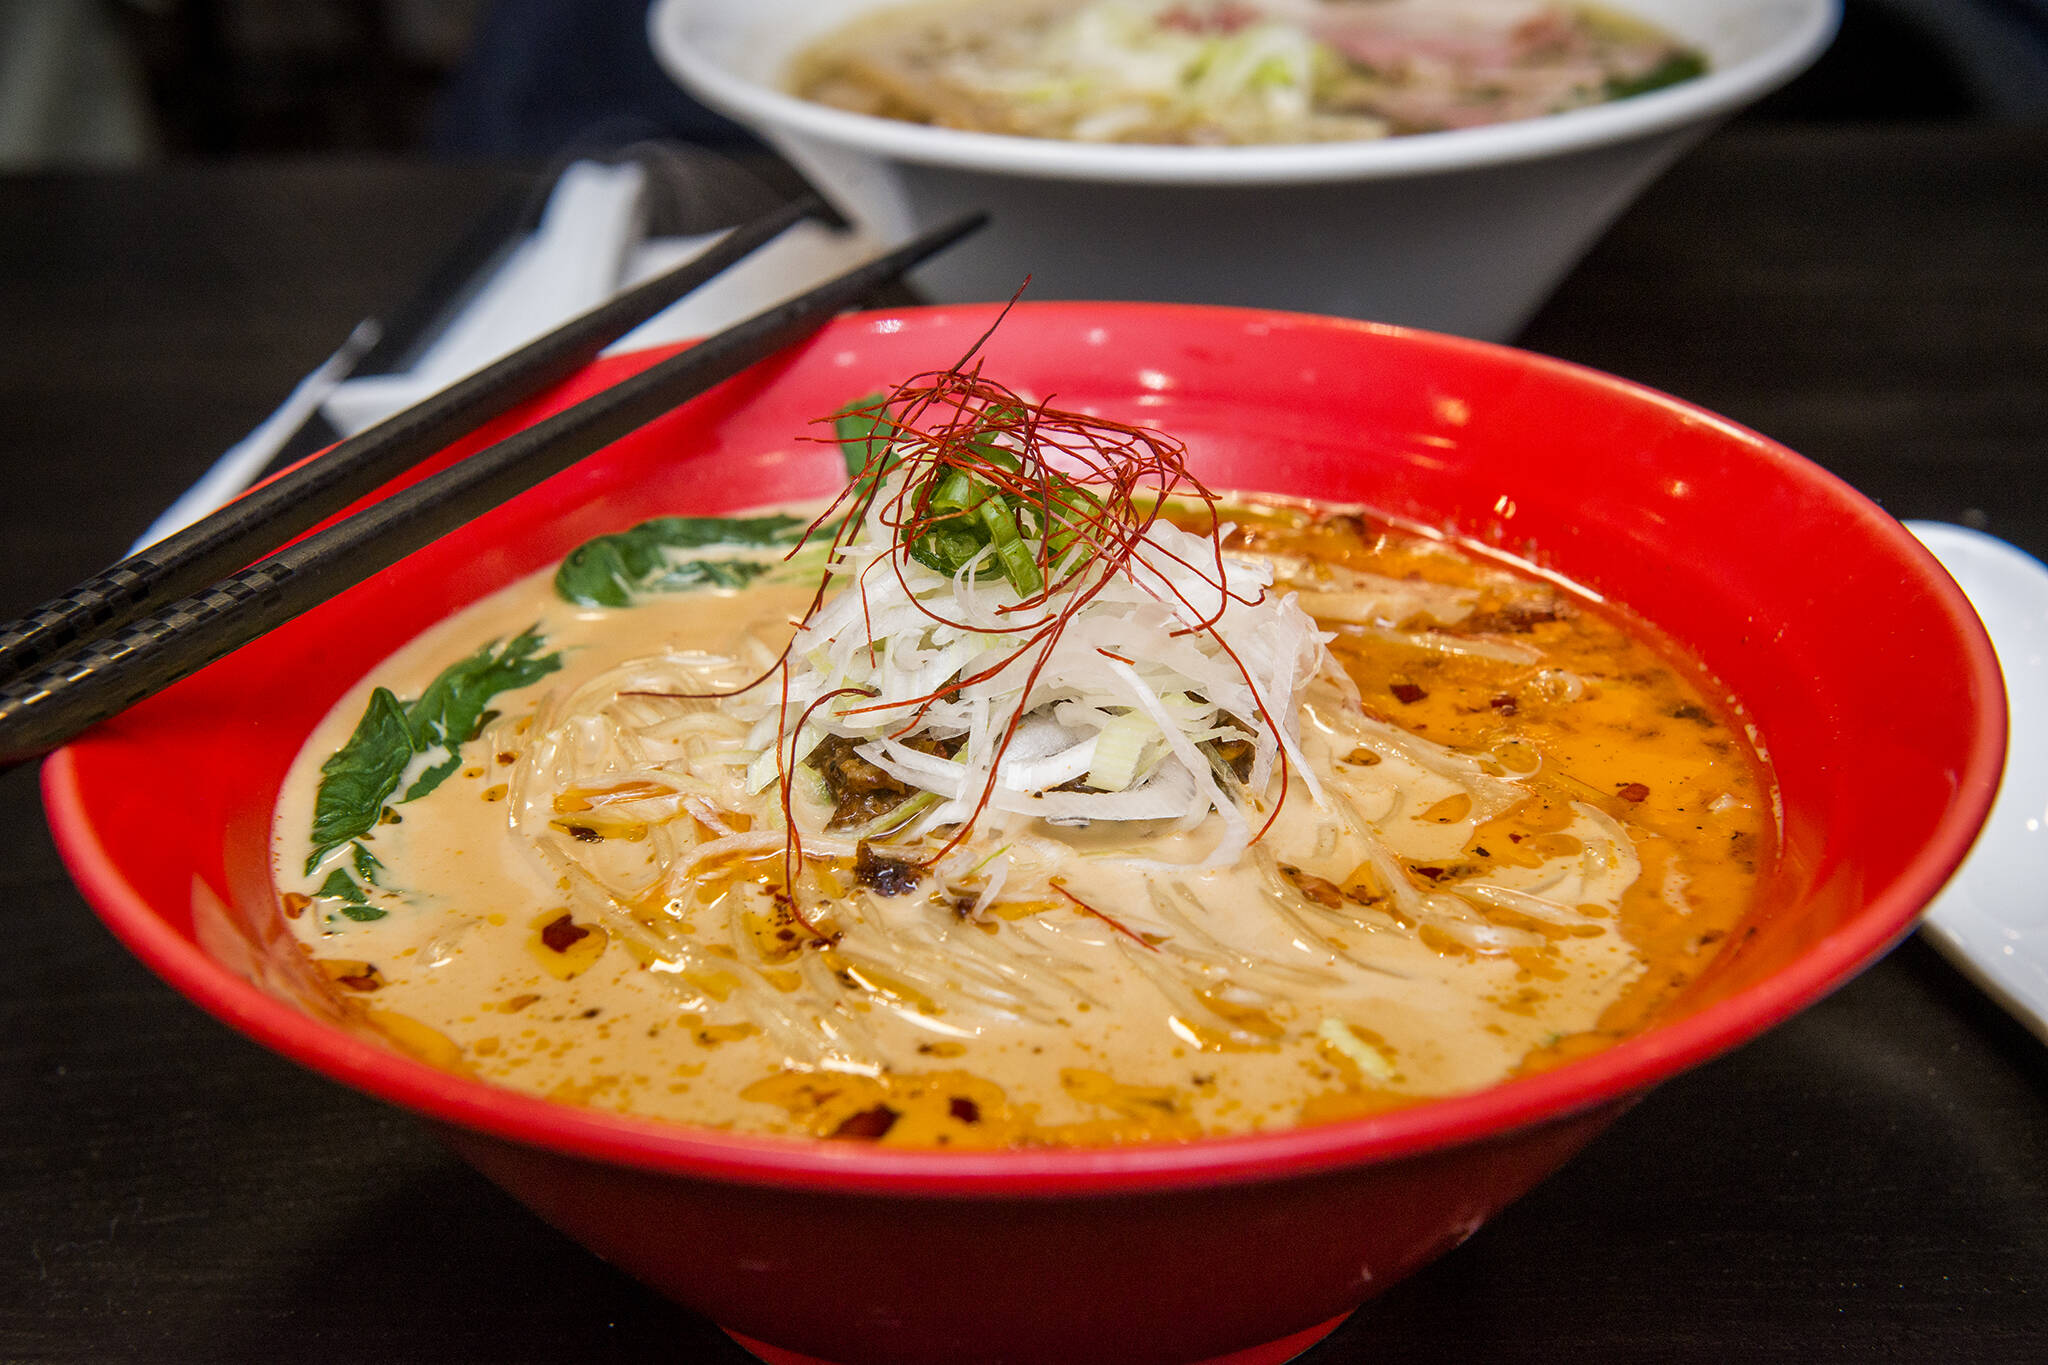 Tokyo's famous ramen shop is opening its first downtown